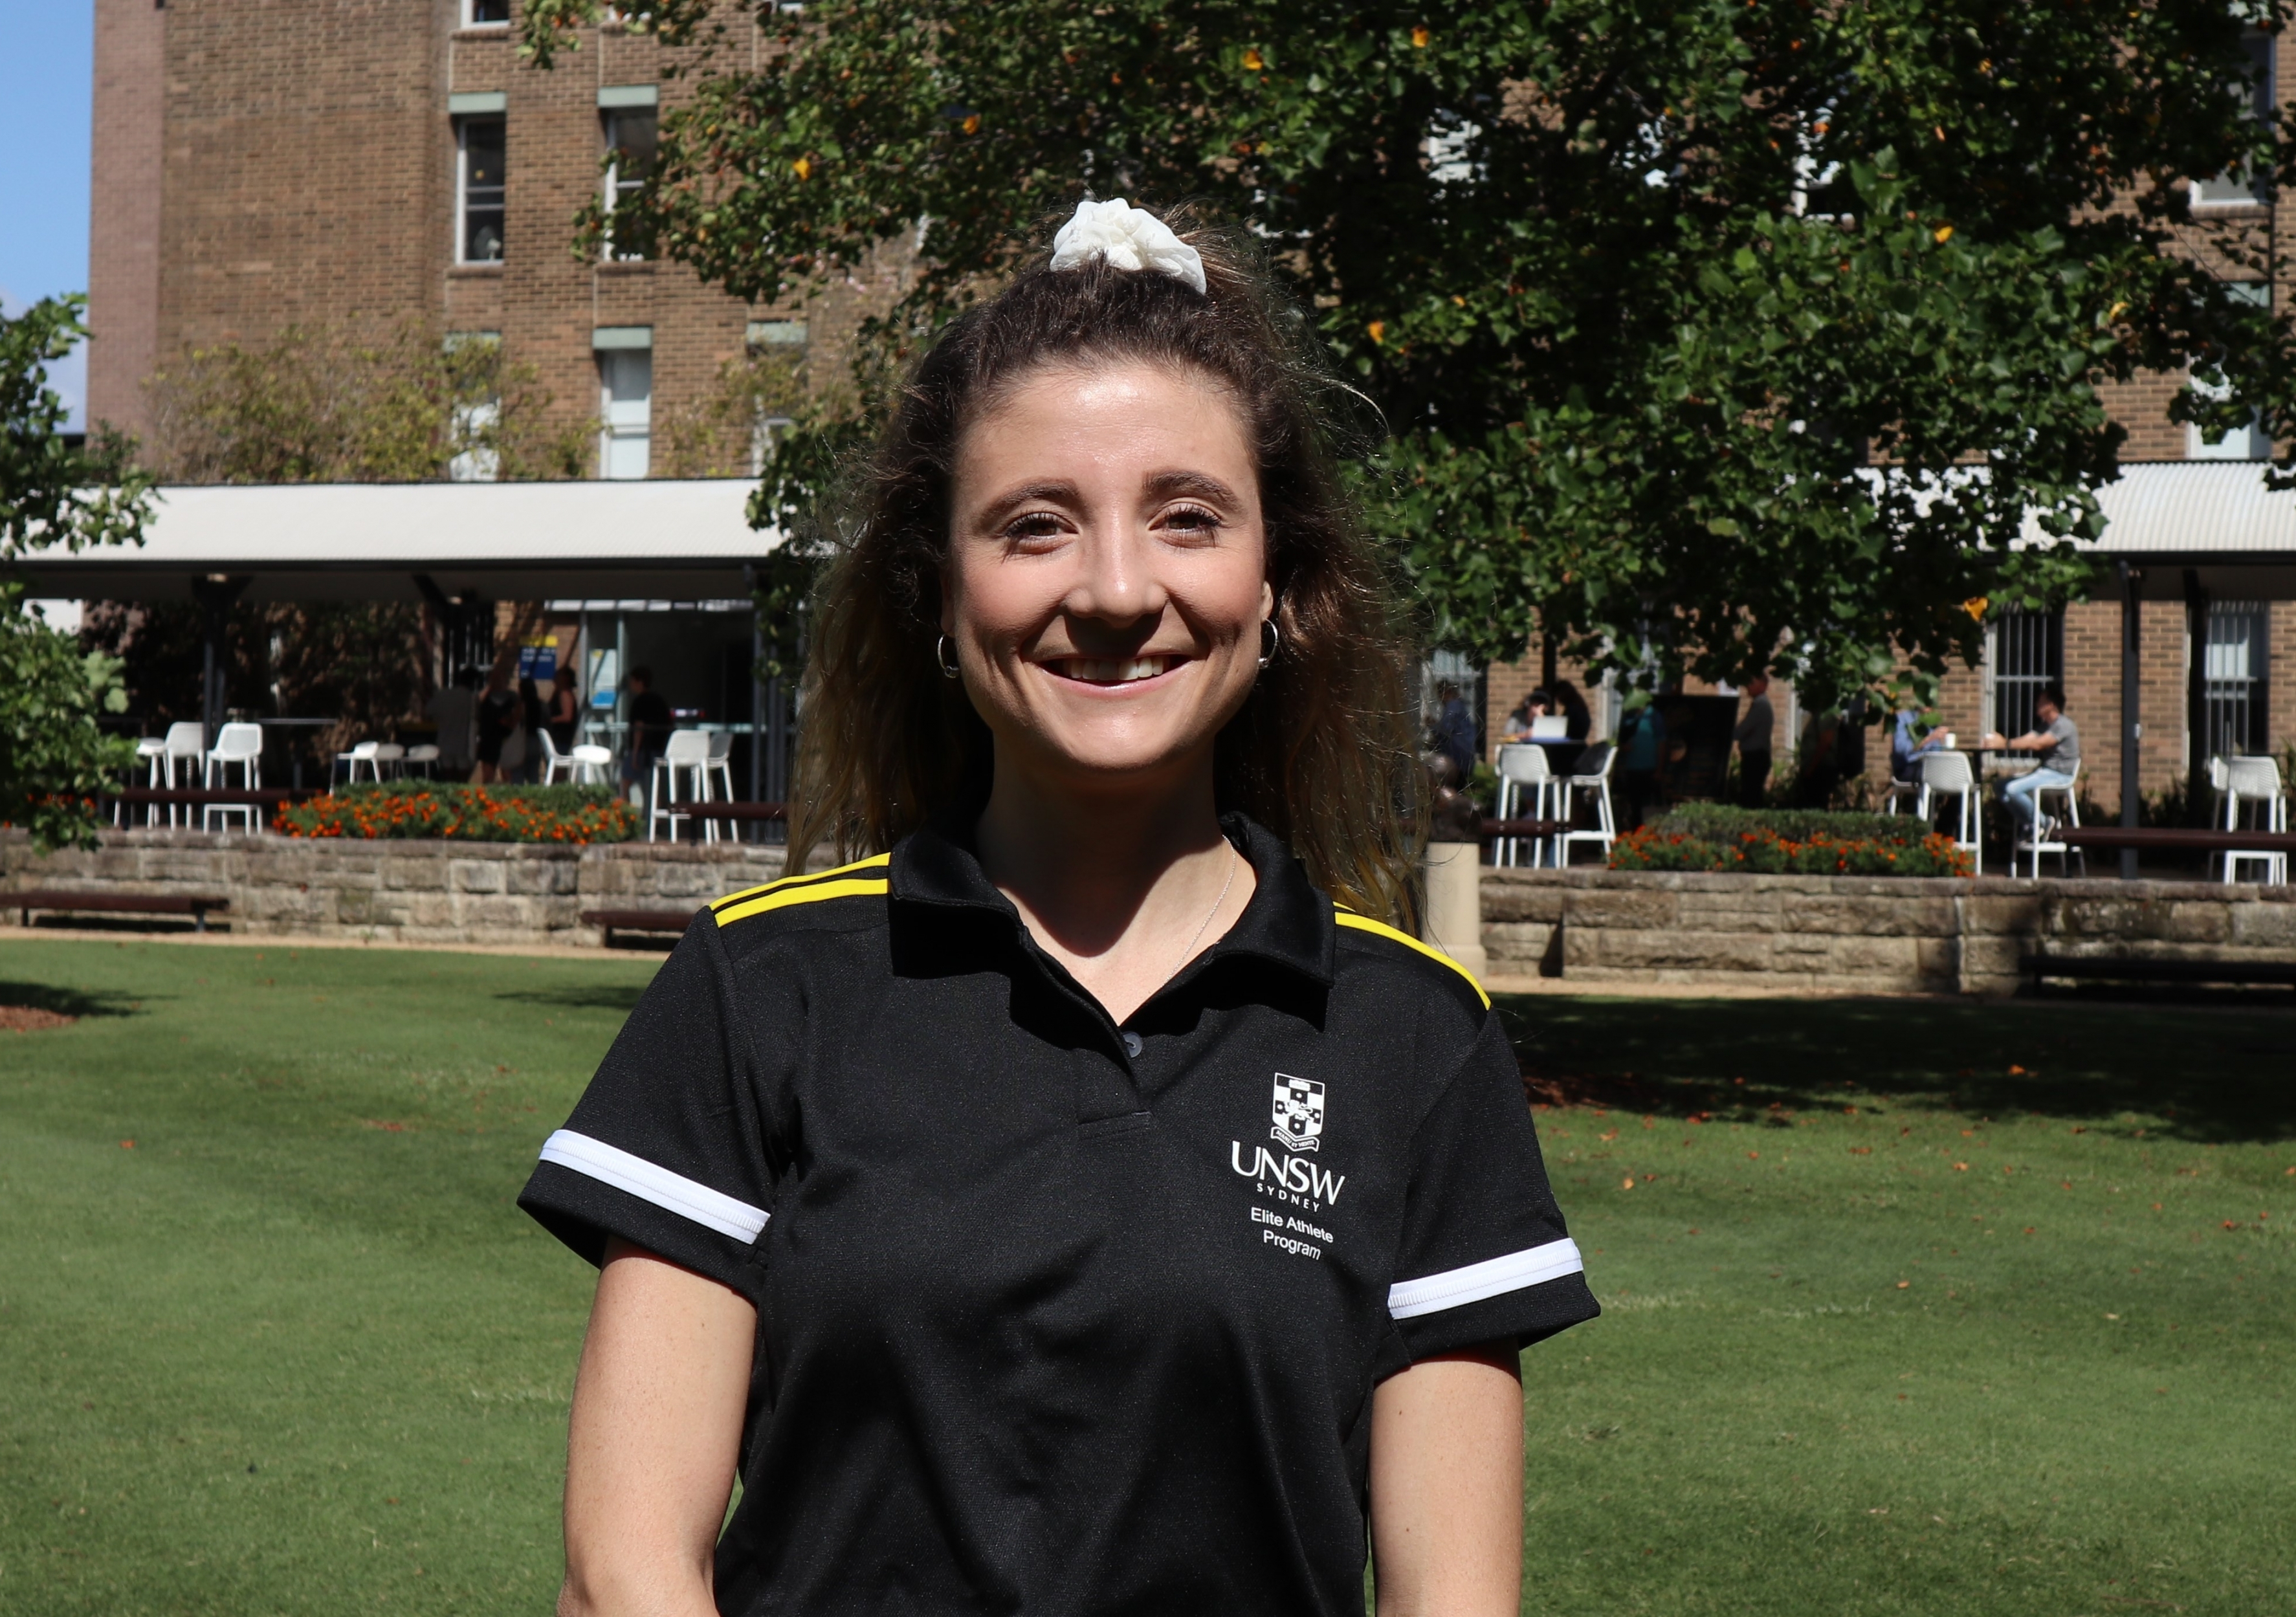 Georgia Winkcup has been able to pursue her dream of running in the Oympics with the assistance of the UNSW Elite Athlete Program.